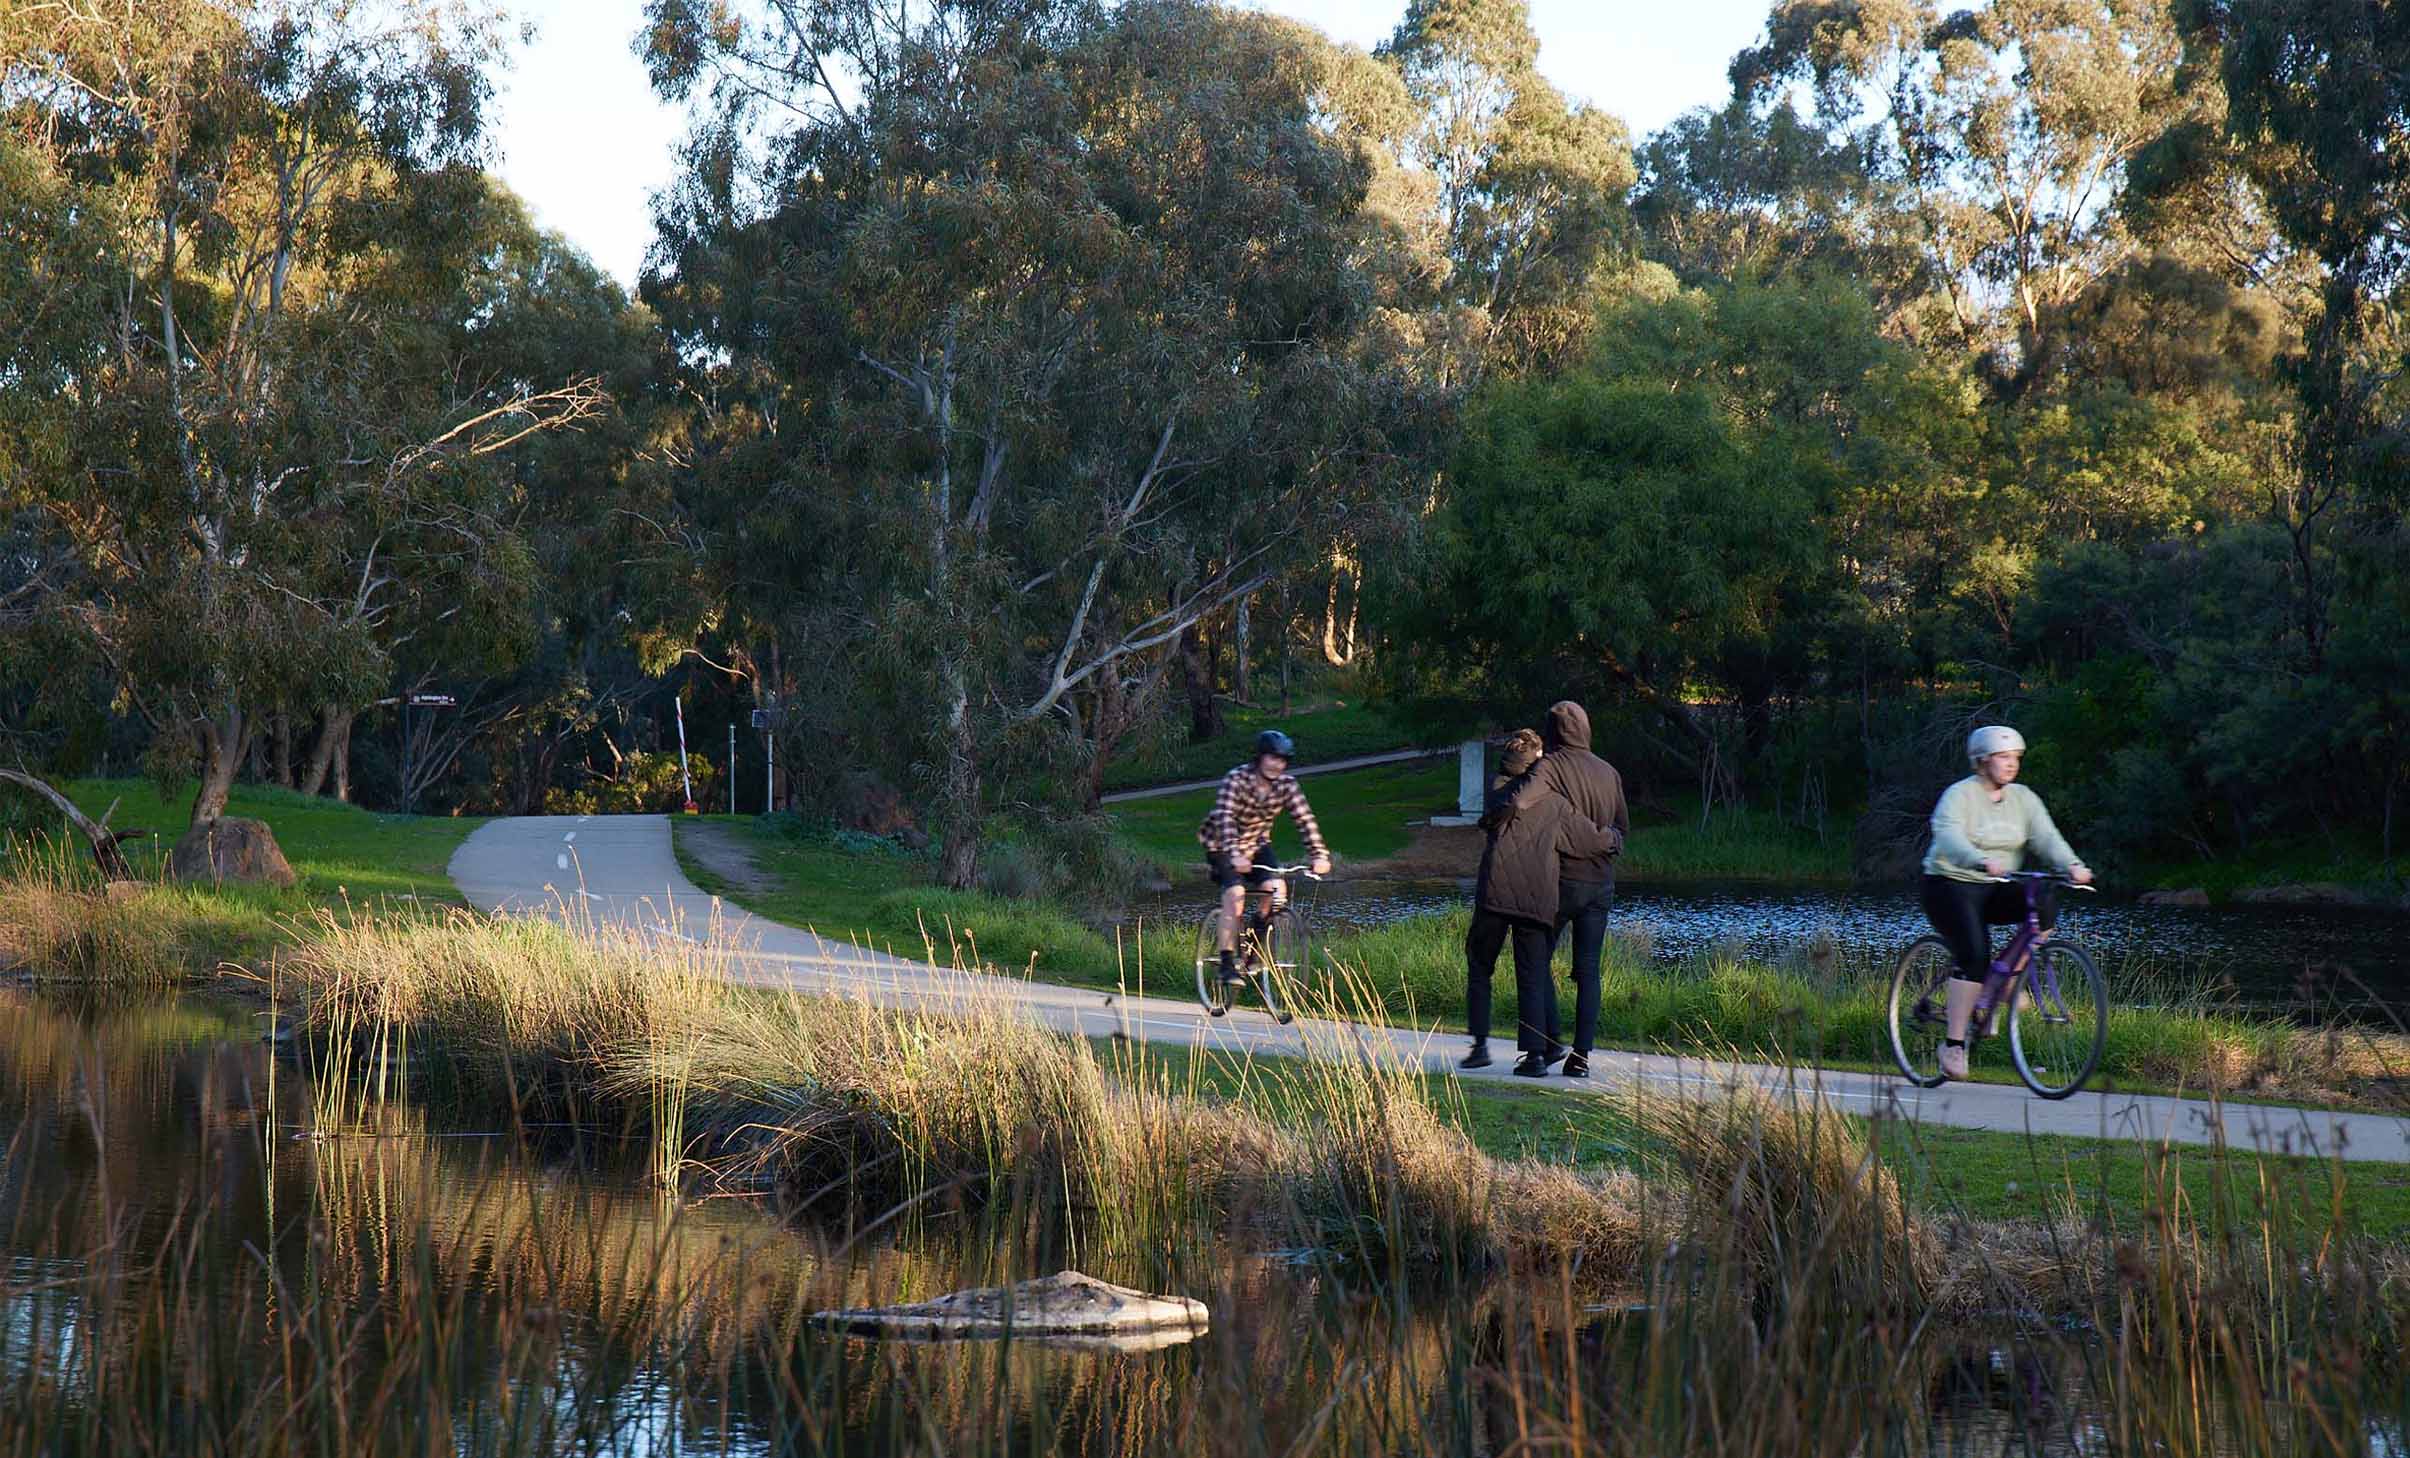 Local park setting with people walking and riding bikes